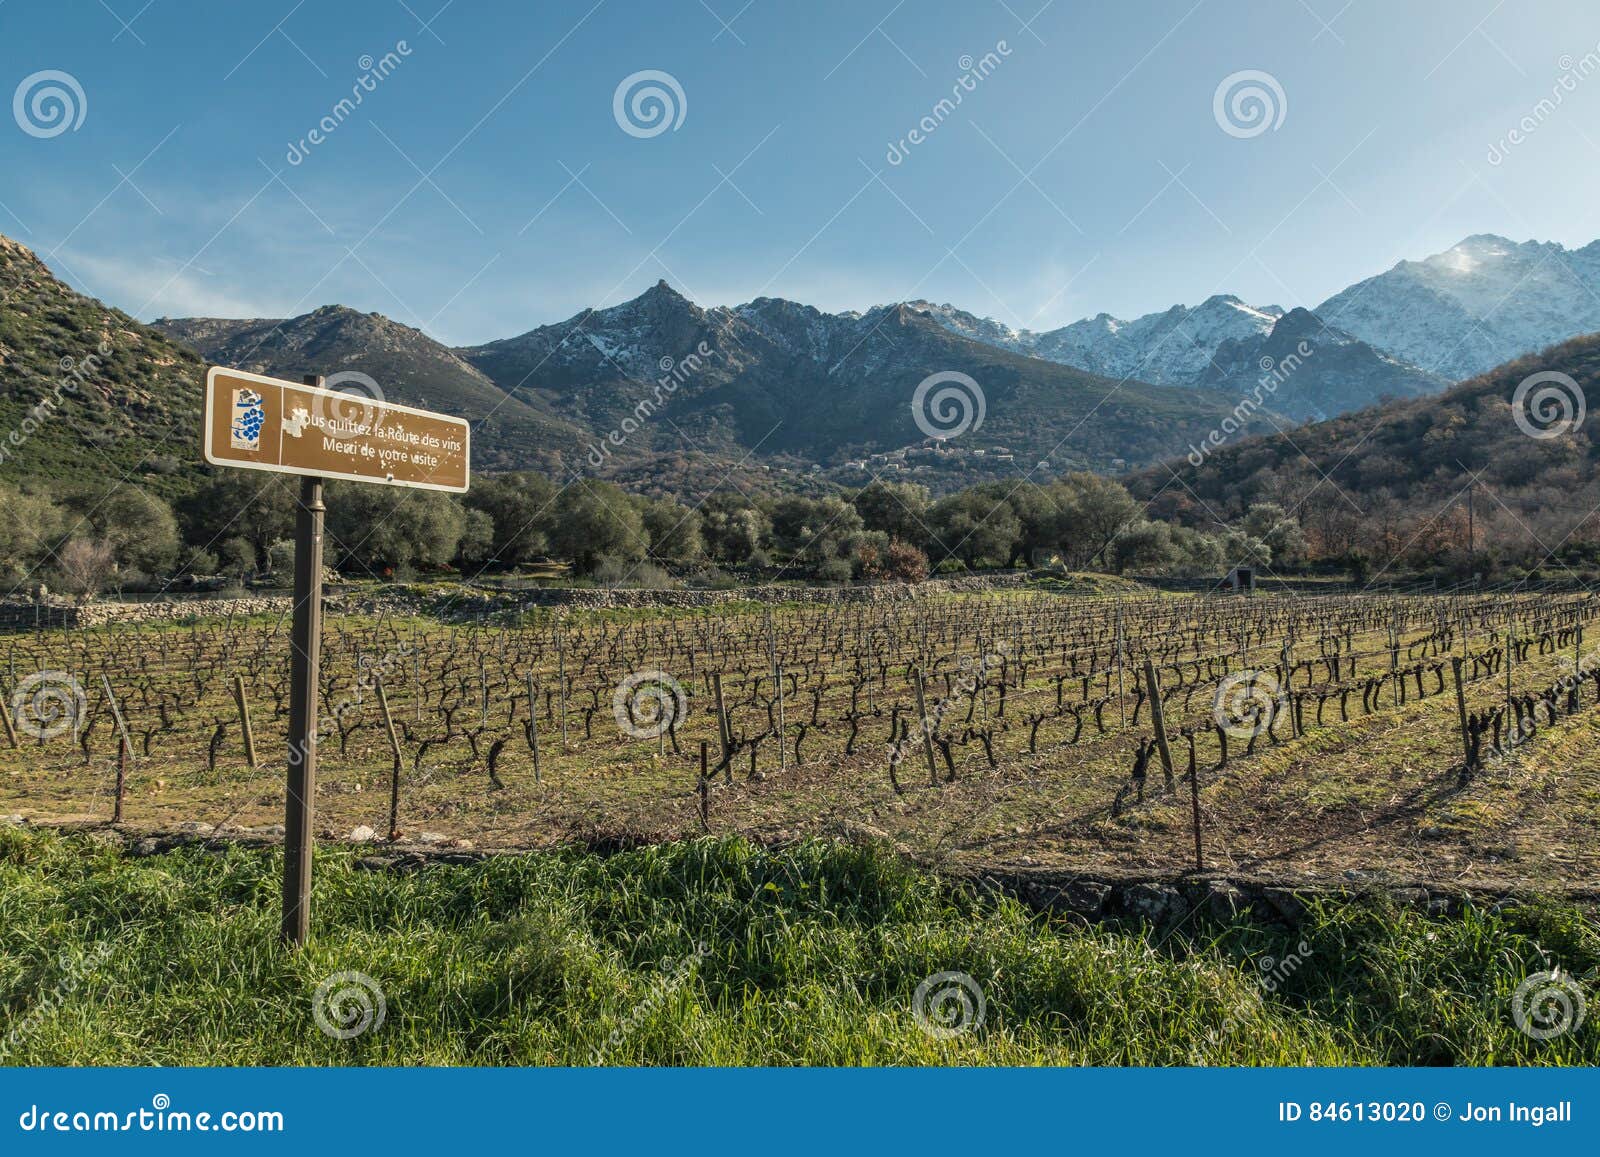 route des vins road sign by vineyard in corsica